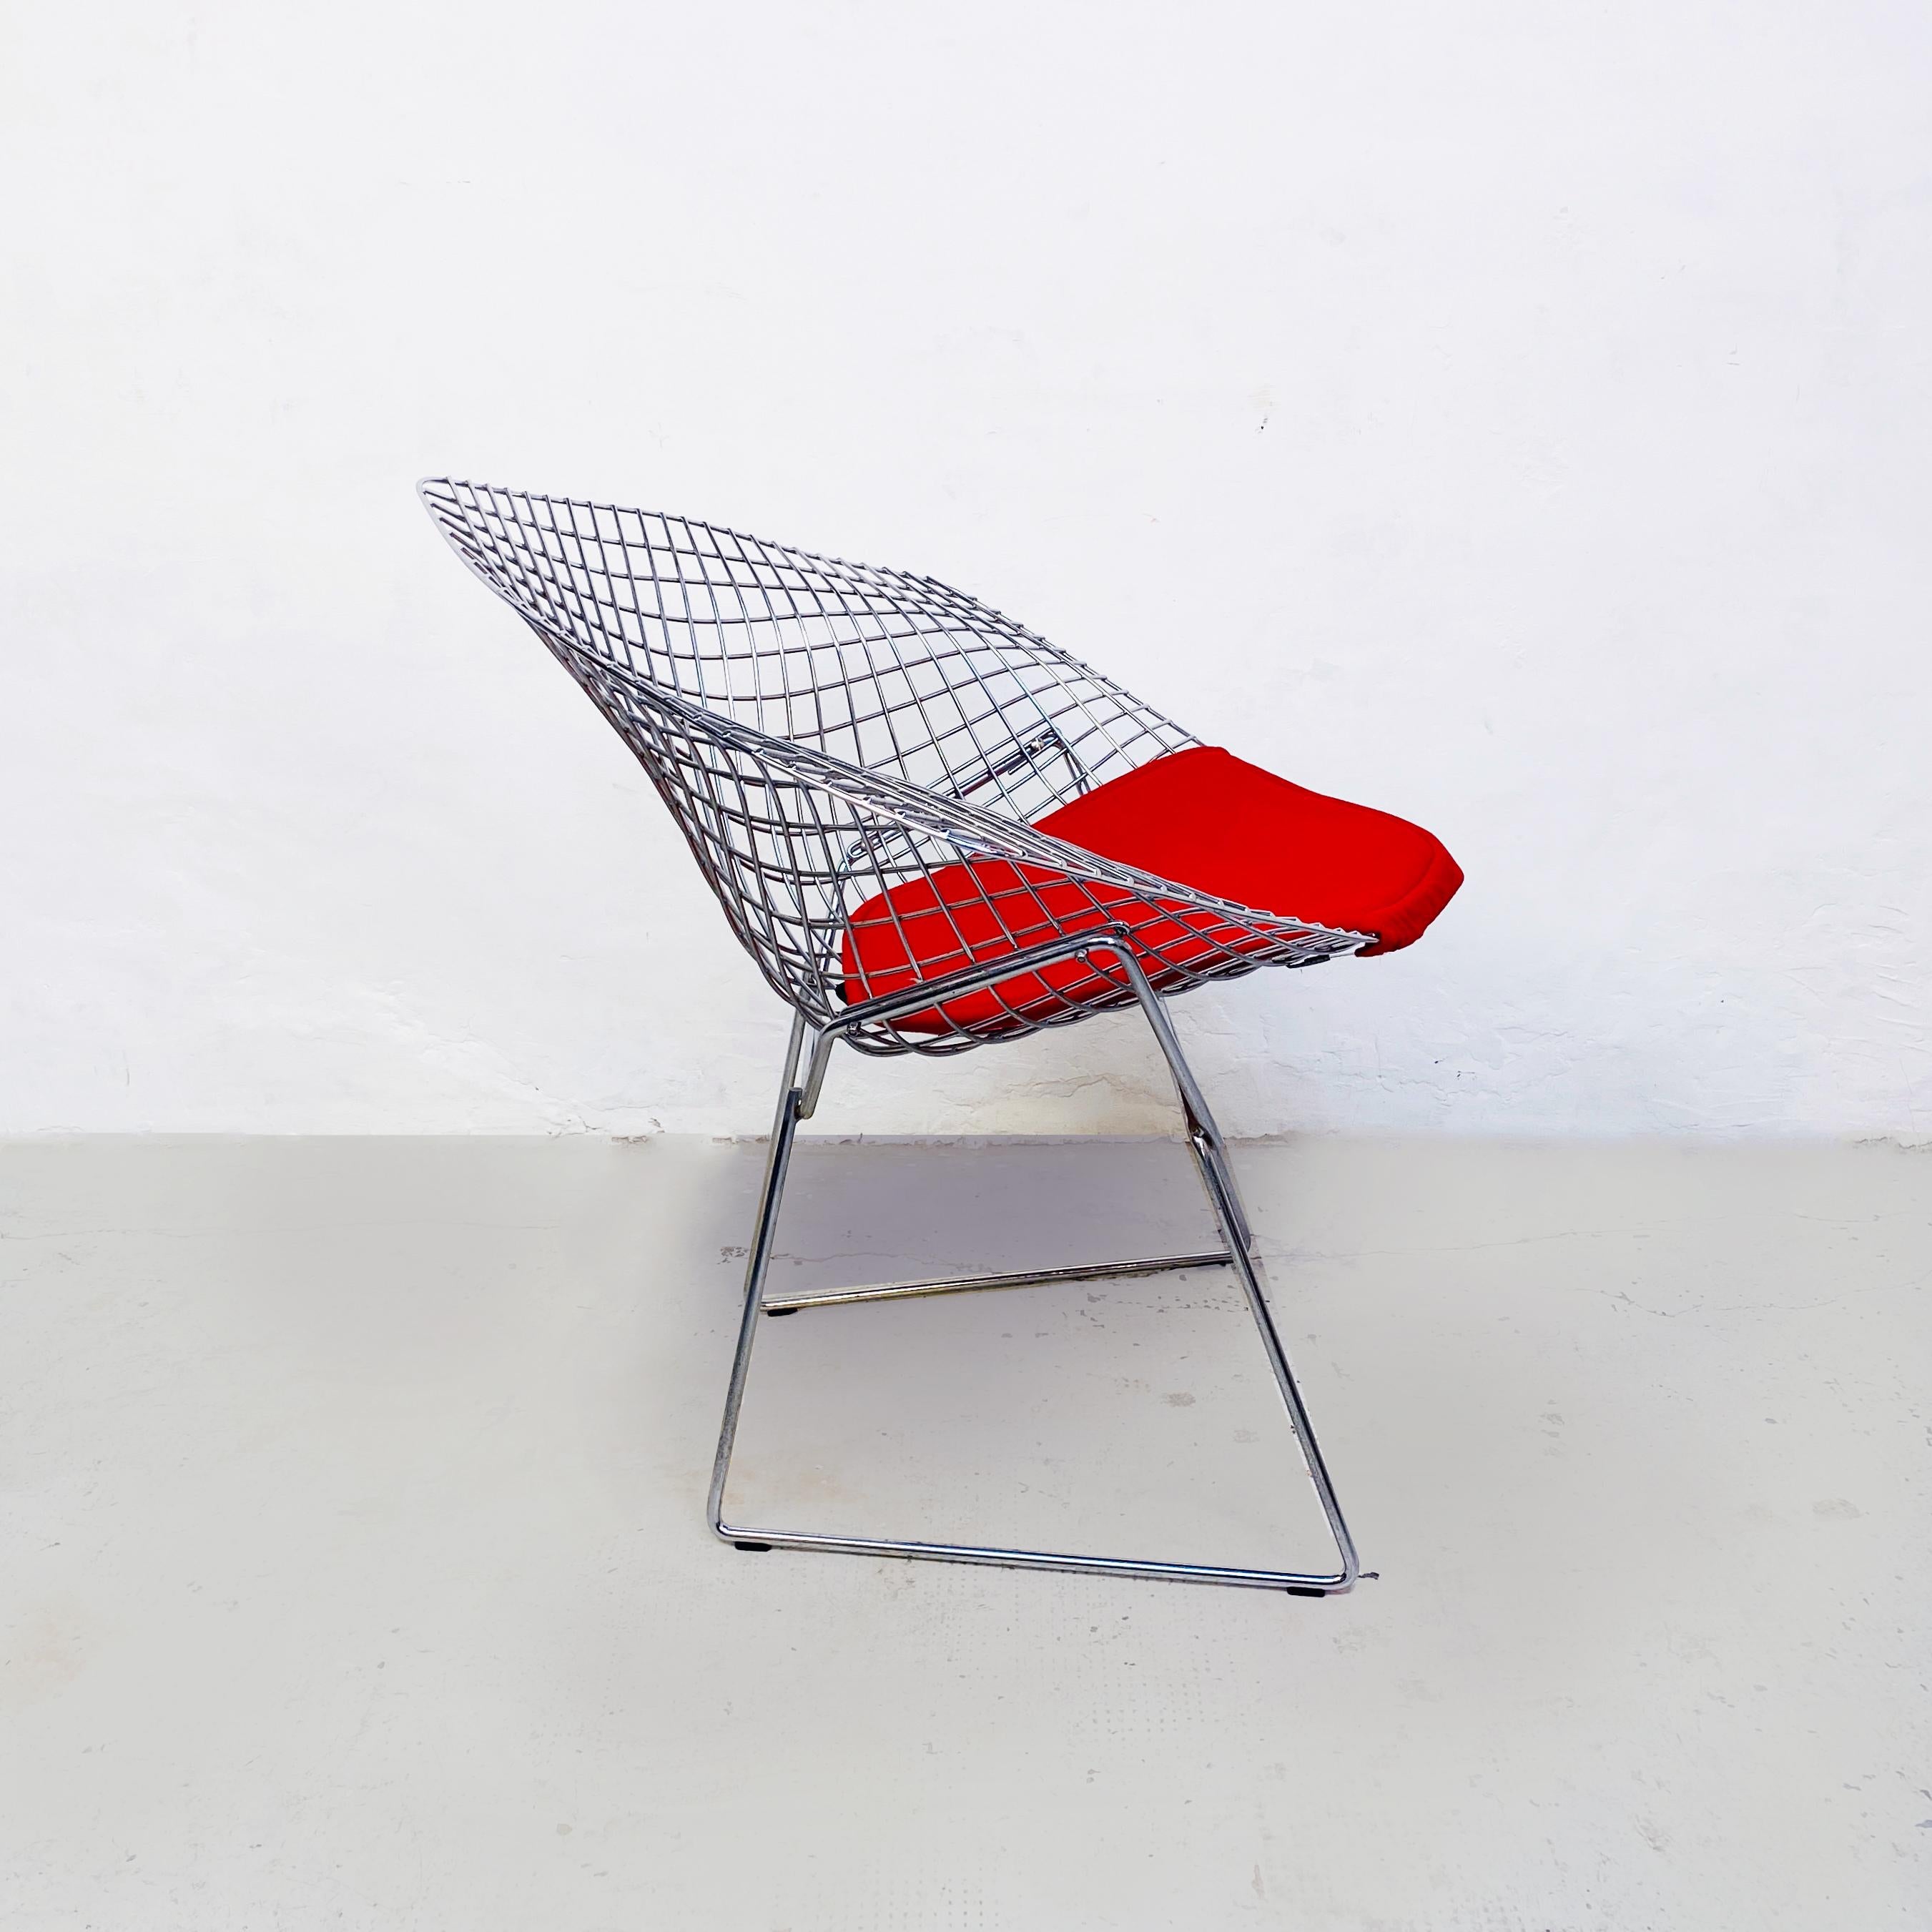 USA mid-century Red cushion and steel Diamond armchair by Bertoia for Knoll, 1970s.
Diamond armchair with structure in welded steel rods with polished chrome plating. The red cushion attaches directly to the frame with hidden monofilament and metal